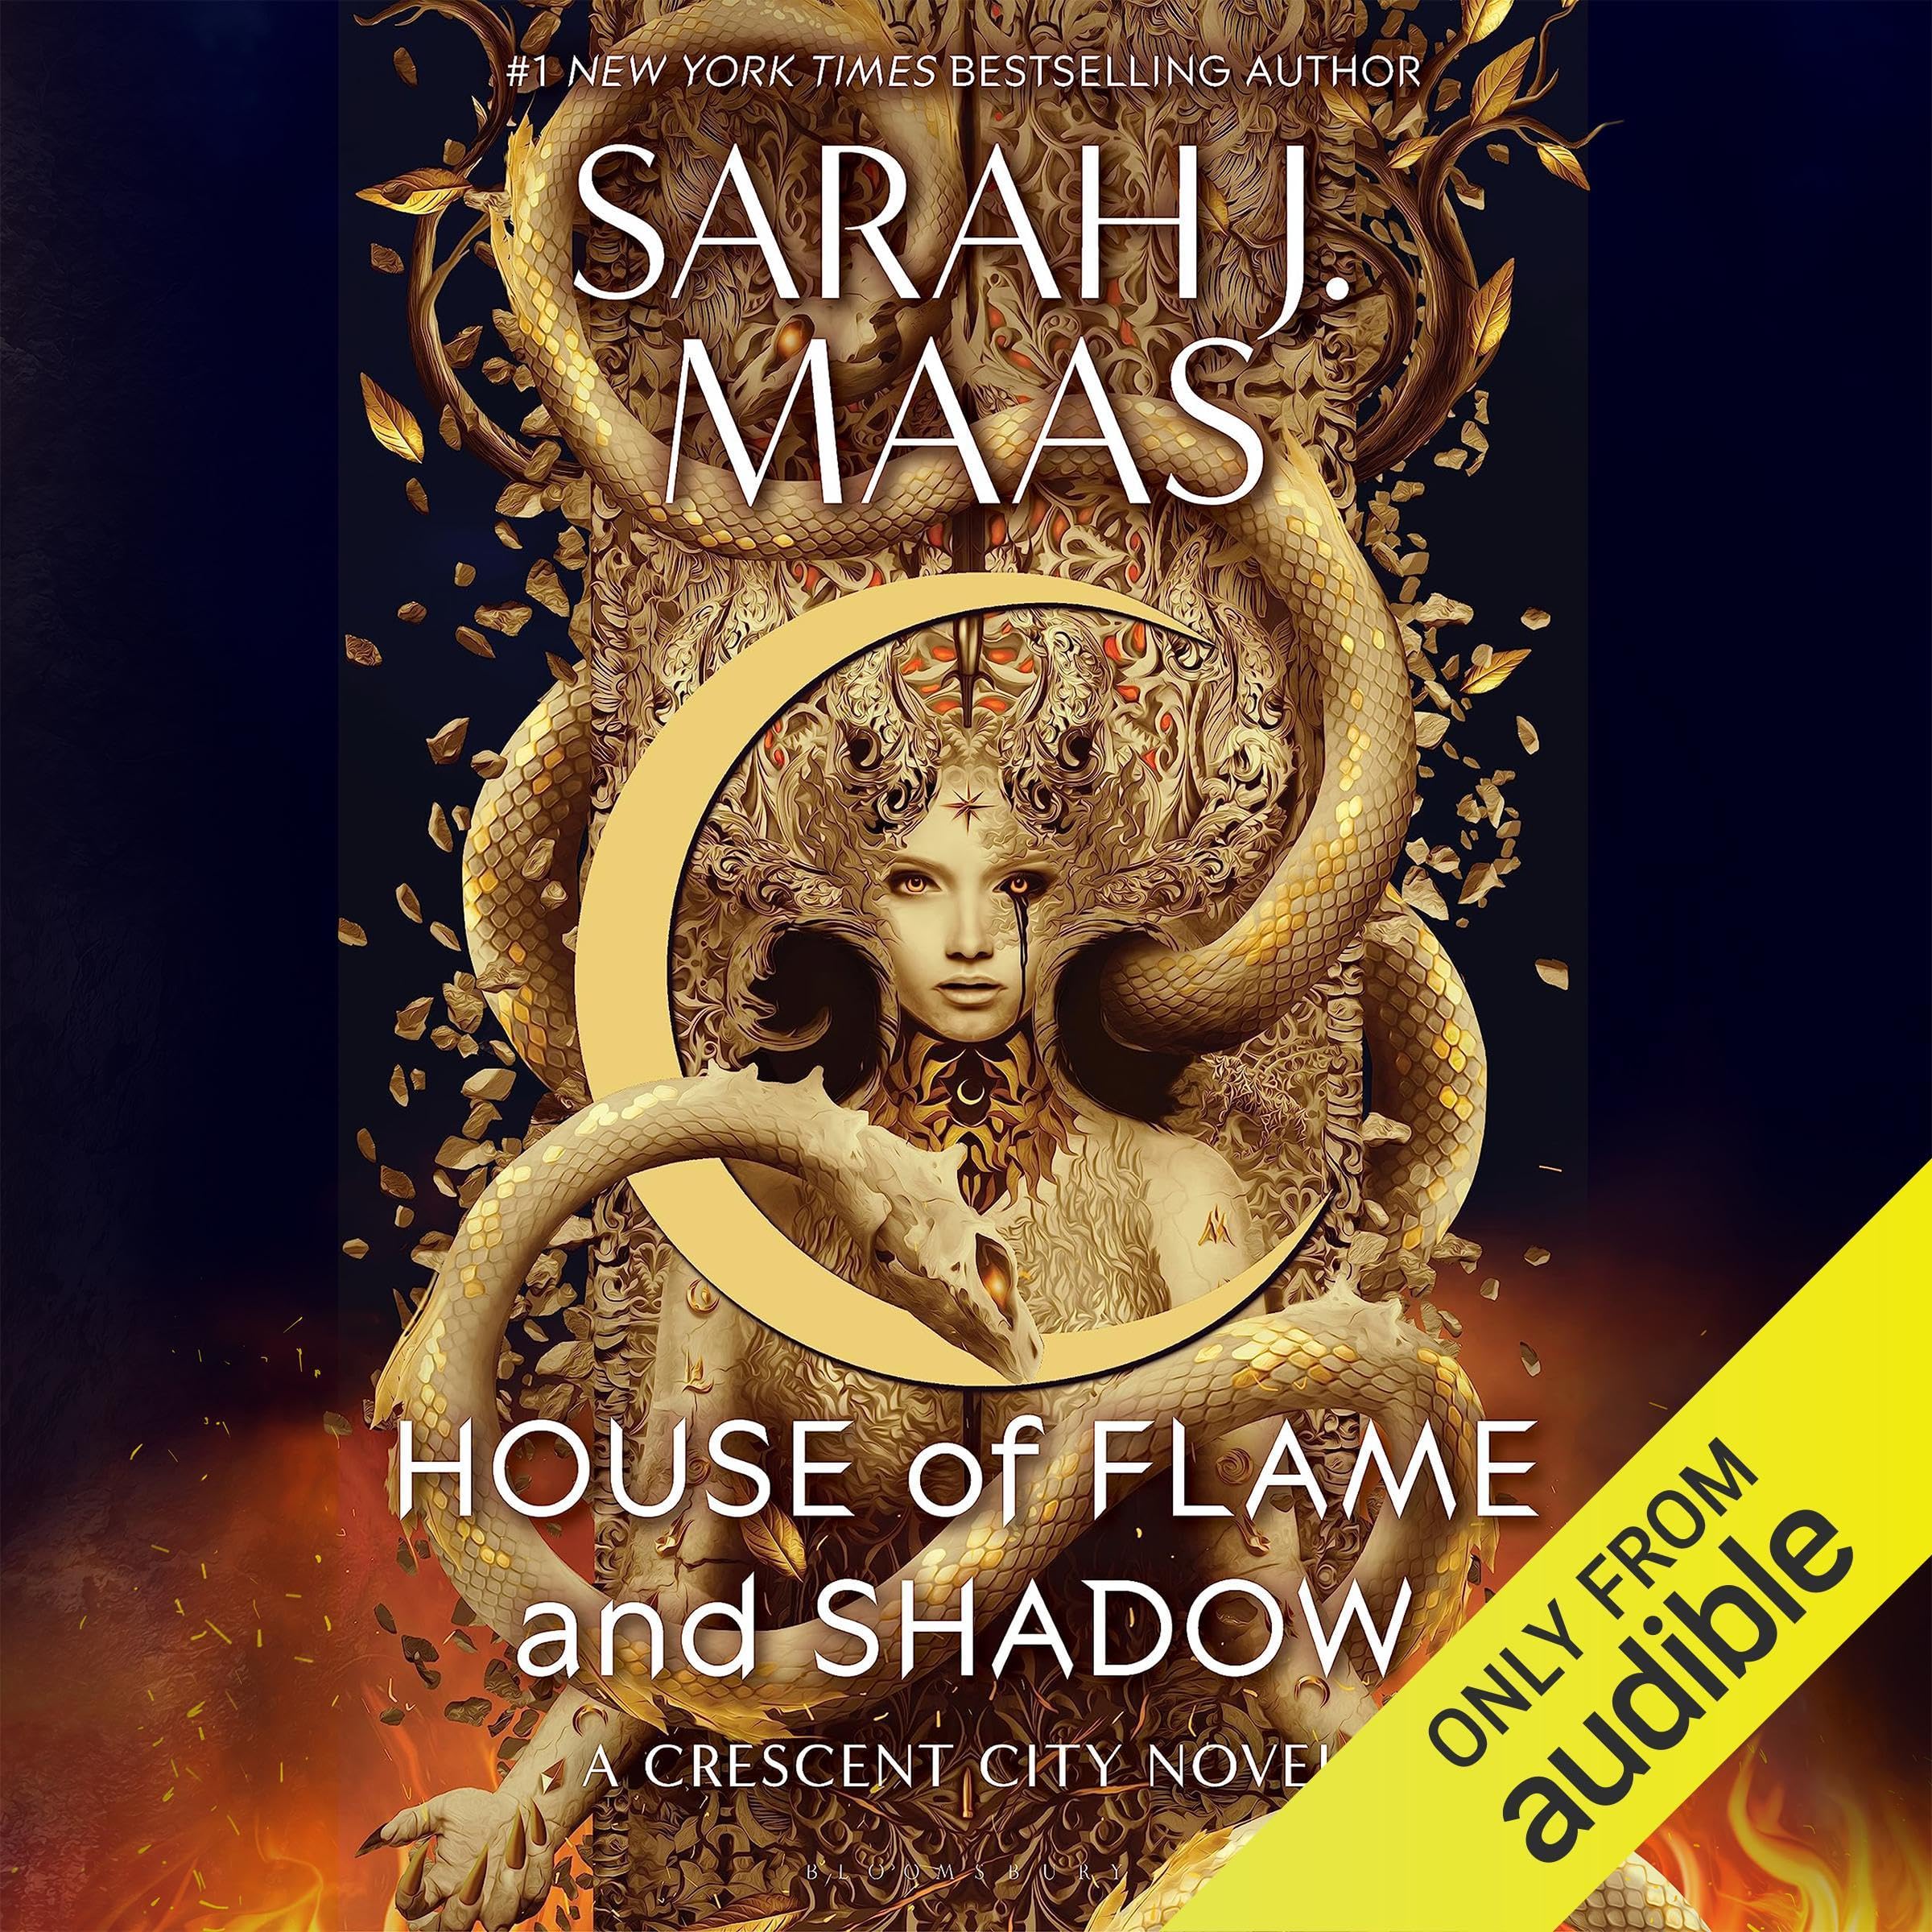 House of Flame and Shadow: Crescent City, Book 3